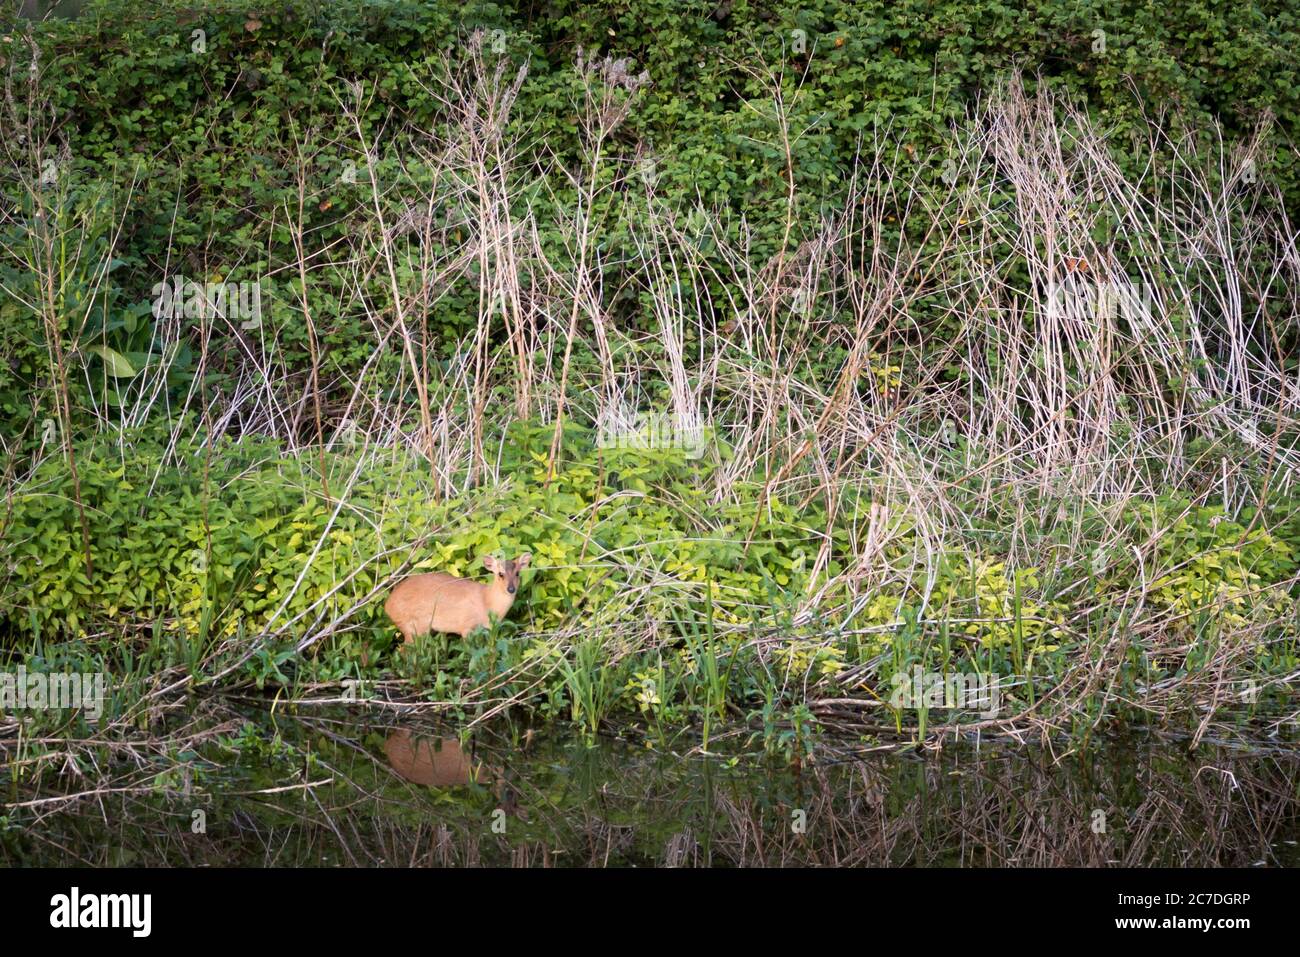 A muntjac deer by the water in the Lee Valley Country Park on the Essex/Hertfordshire border, England, UK Stock Photo